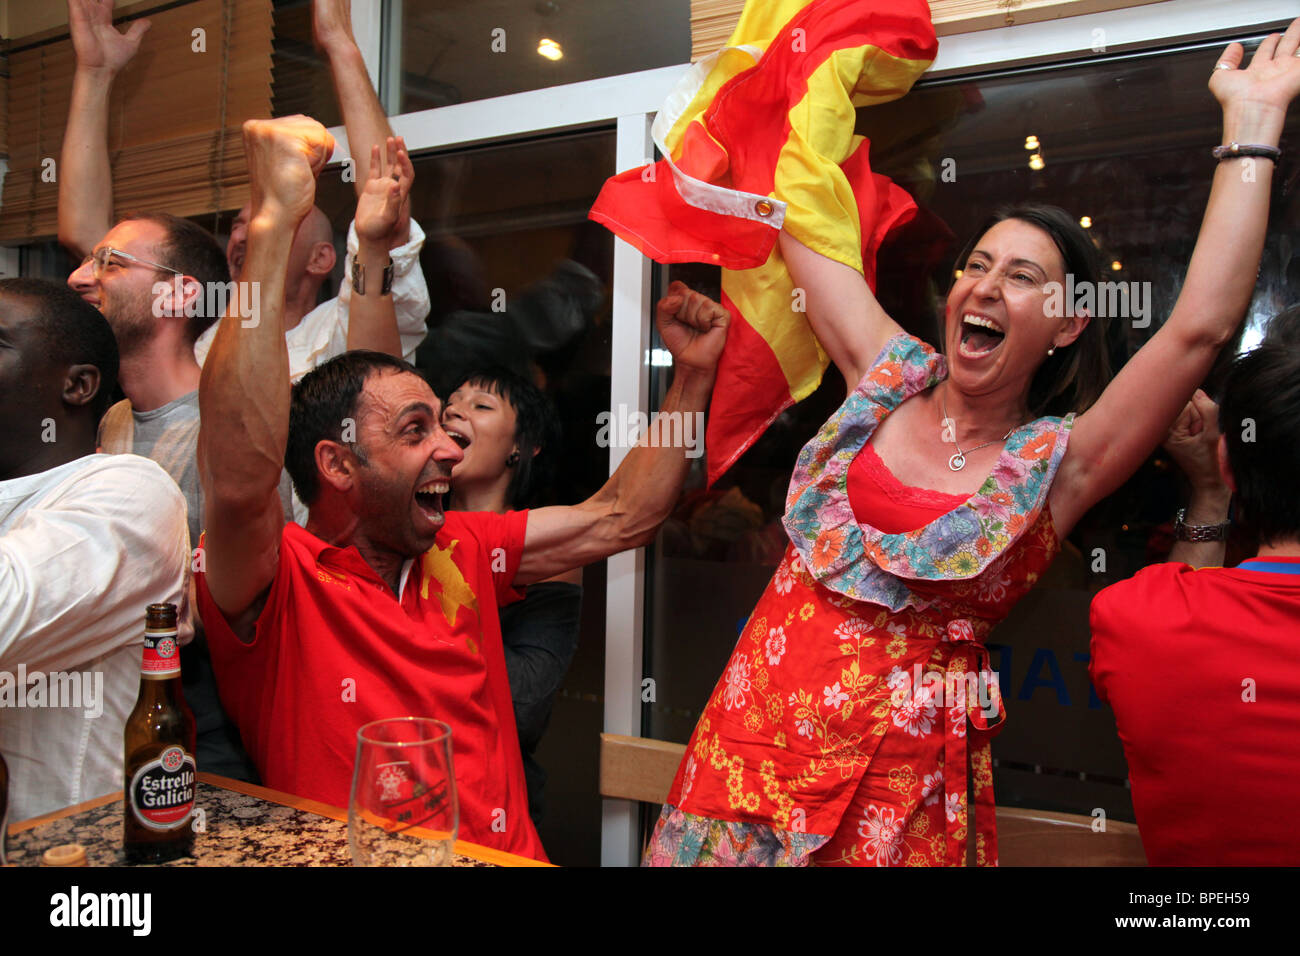 Supporters of Spain cheer and celebrate as their country wins the world cup final. Taken in a restaurant/bar in London Stock Photo